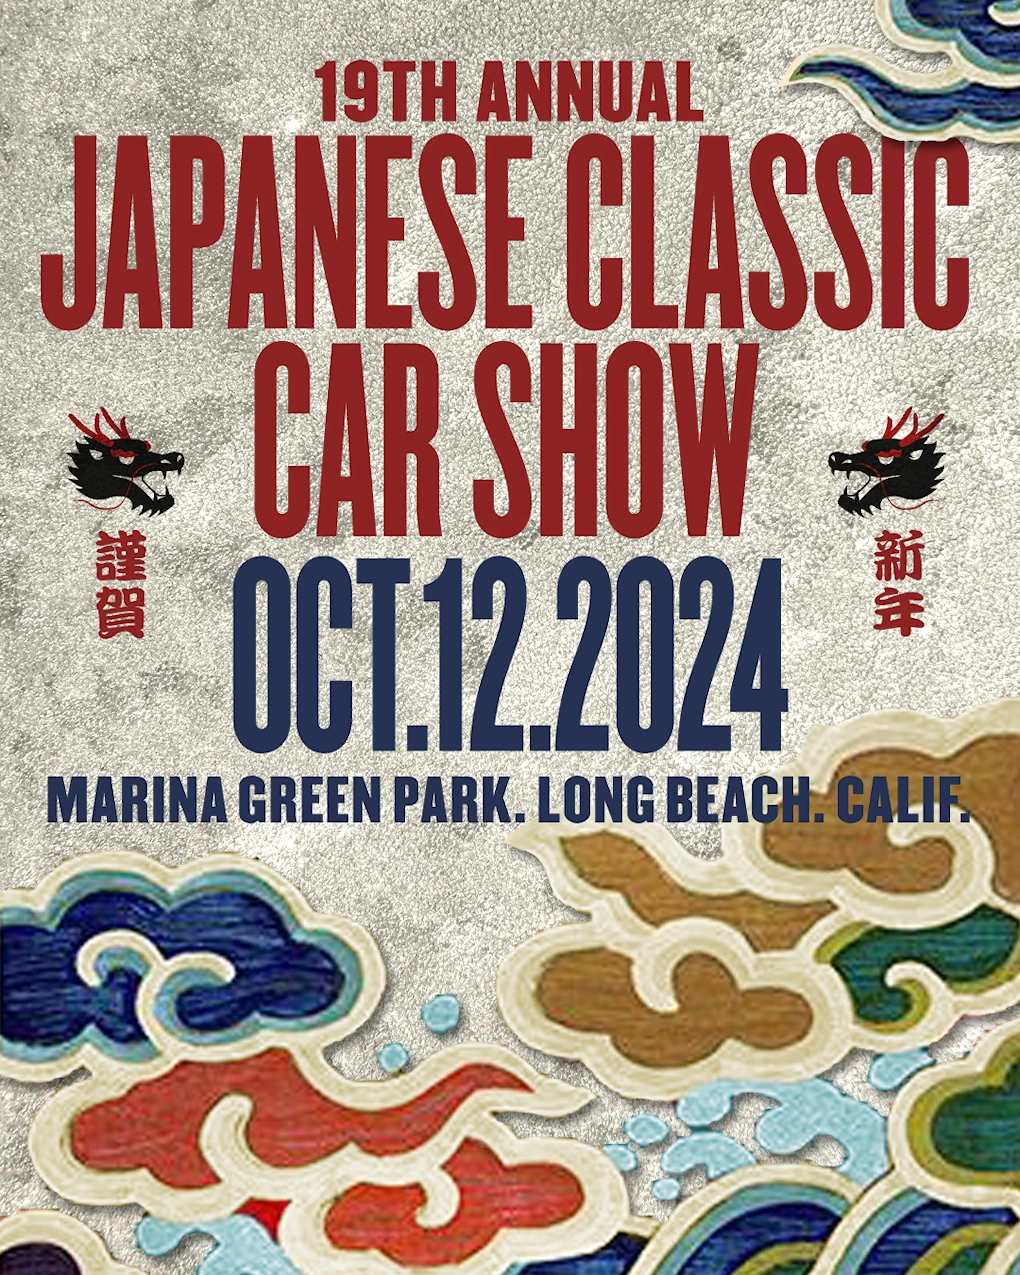 2024: 19th Annual Japanese Classic Car Show Event-America's 1st & Original Large Scale Japanese Show Dedicated to Old School Cars, Marina Green Park | Japanese-City.com